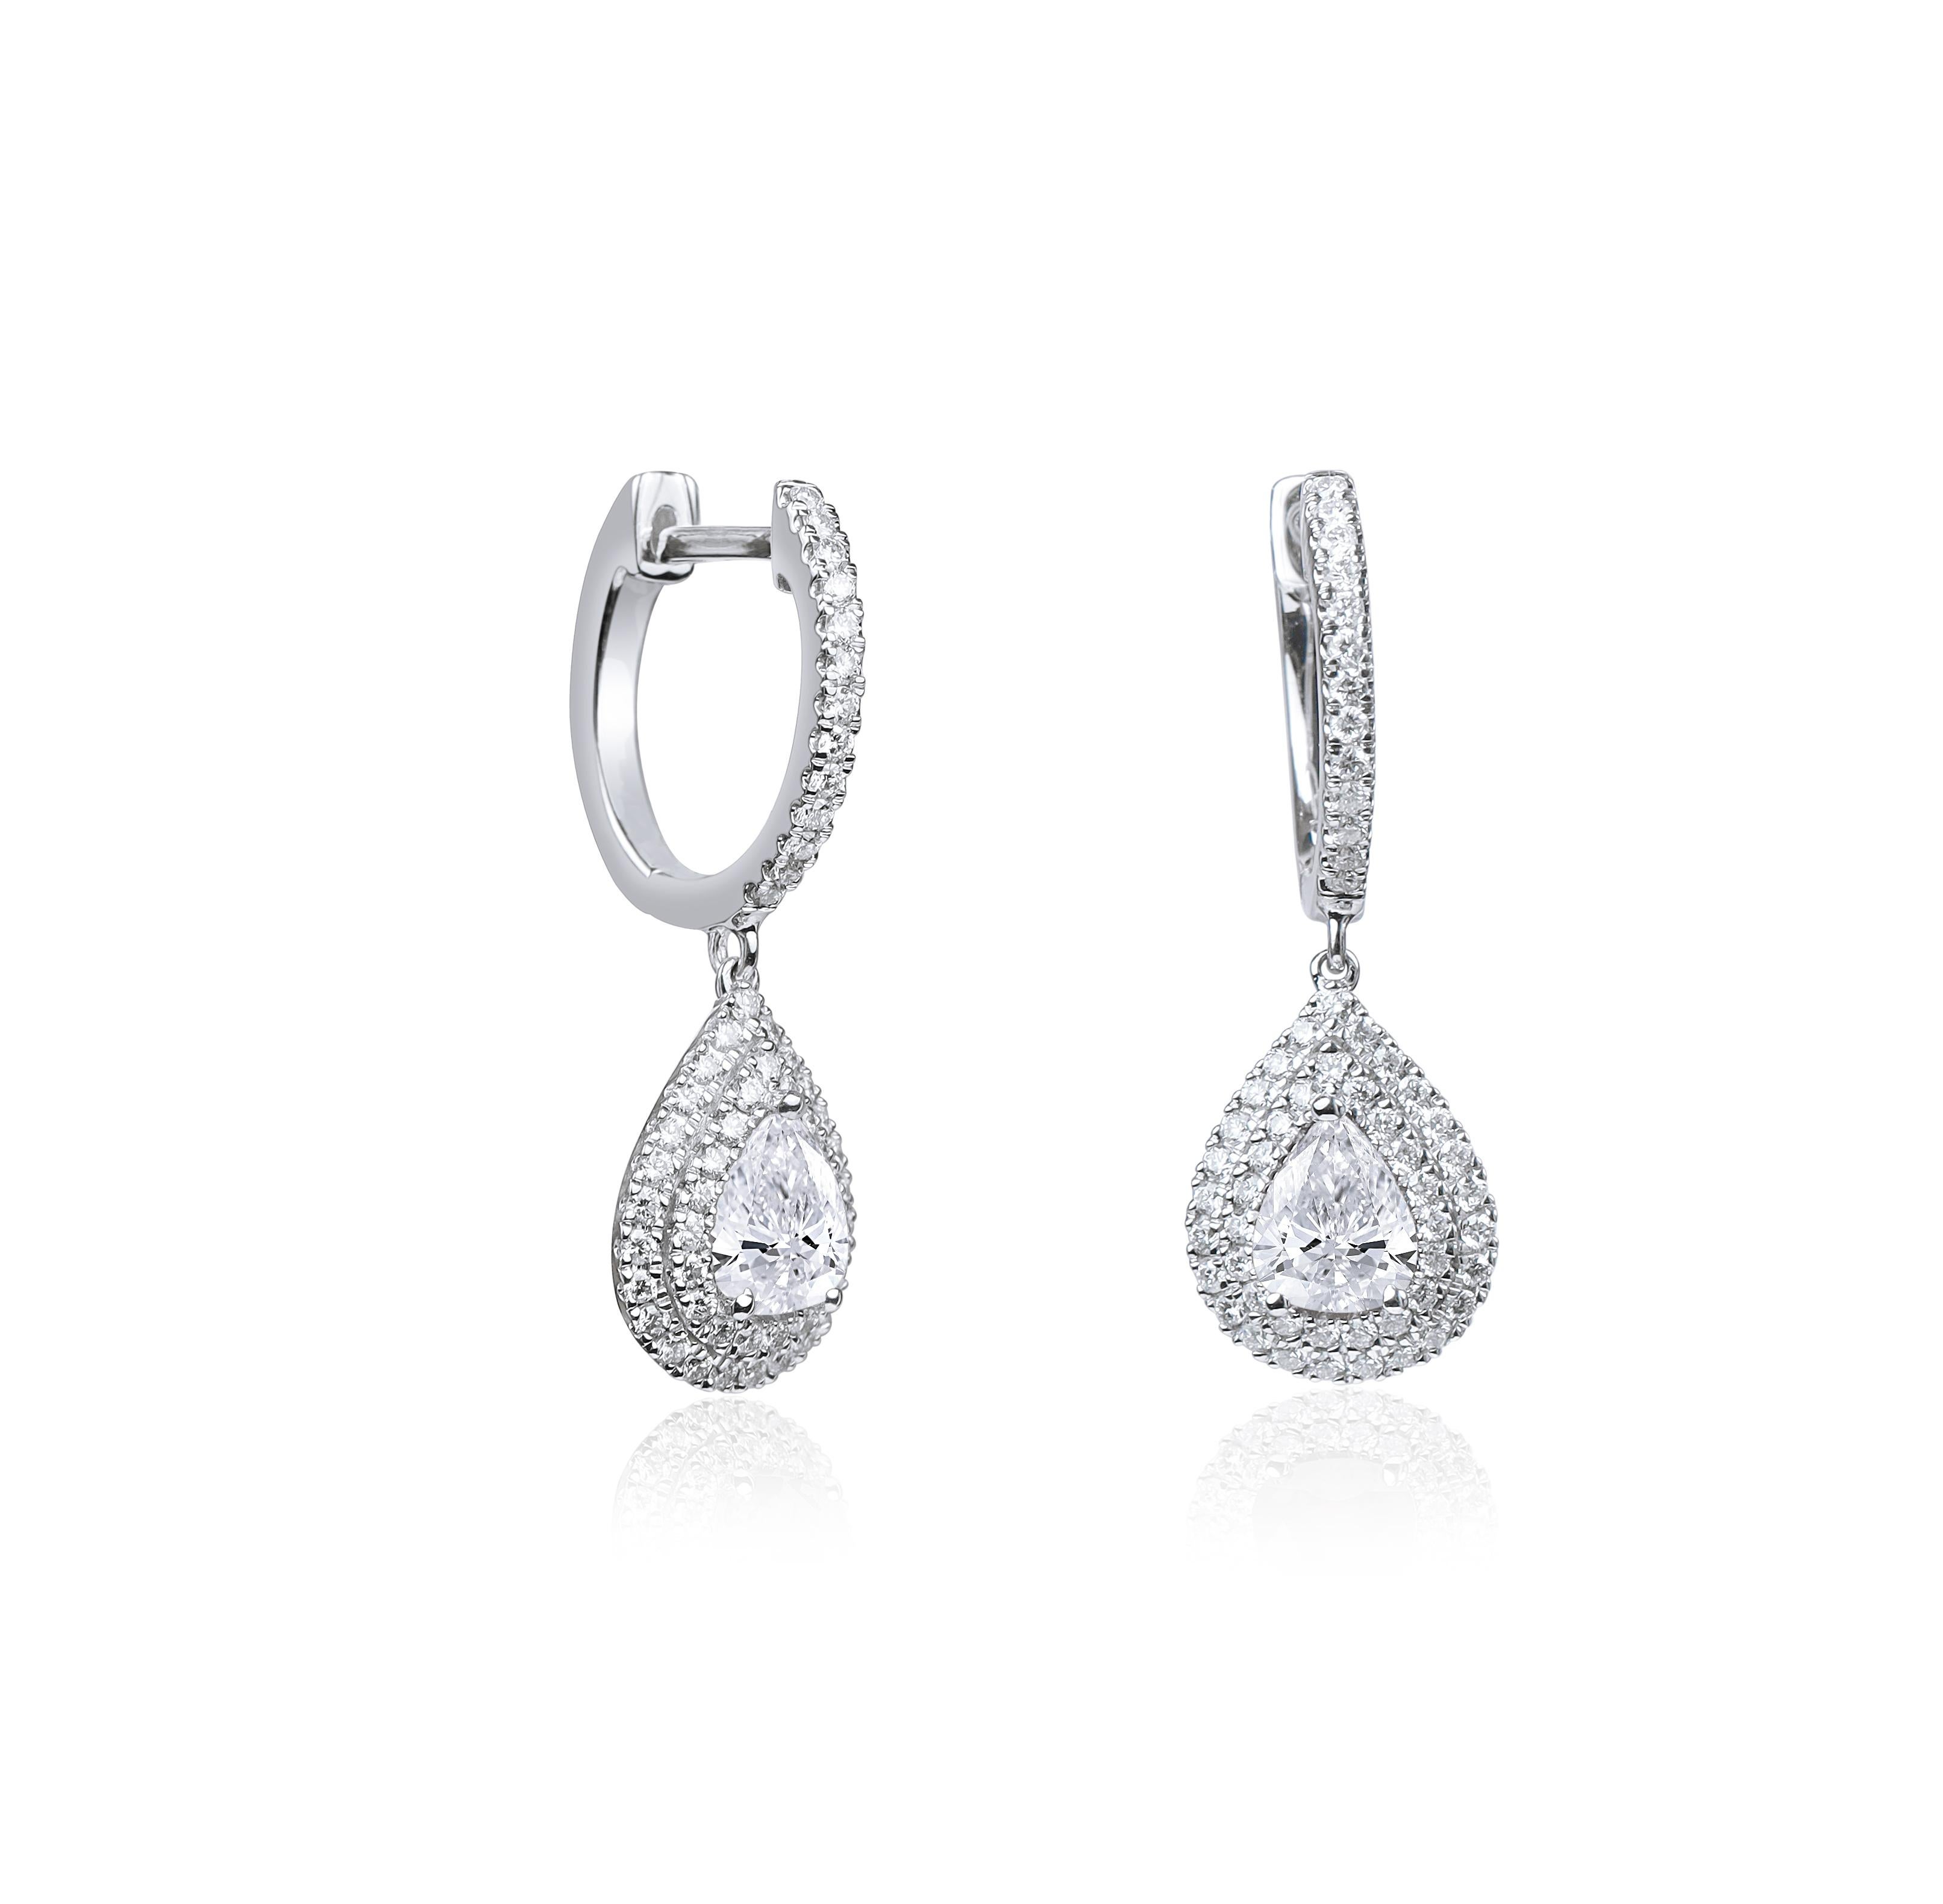 2 TCW Carat Art Deco Diamond Pear Cut Drop Dangle Earrings Setting E VVS GIA

Available in 18k white gold.

Same design can be made also with other custom gemstones per request.

Product details:

- Solid gold (approx. 5.5 grams)

- approx. 0.75